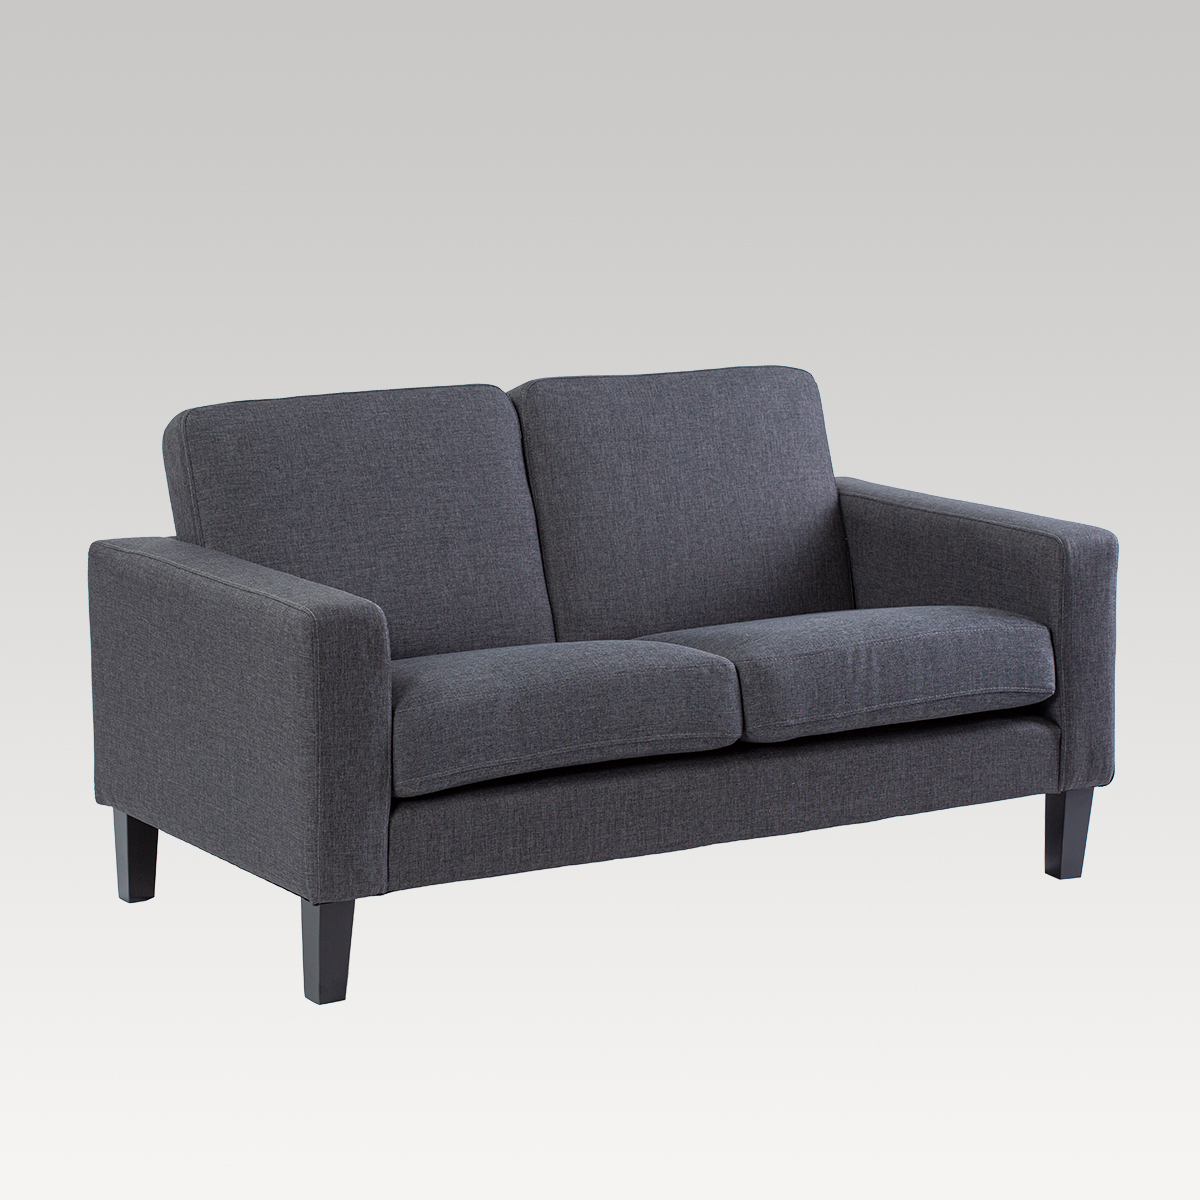 Image of Makers Fenix Fabric 2 Seater Sofa - Charcoal